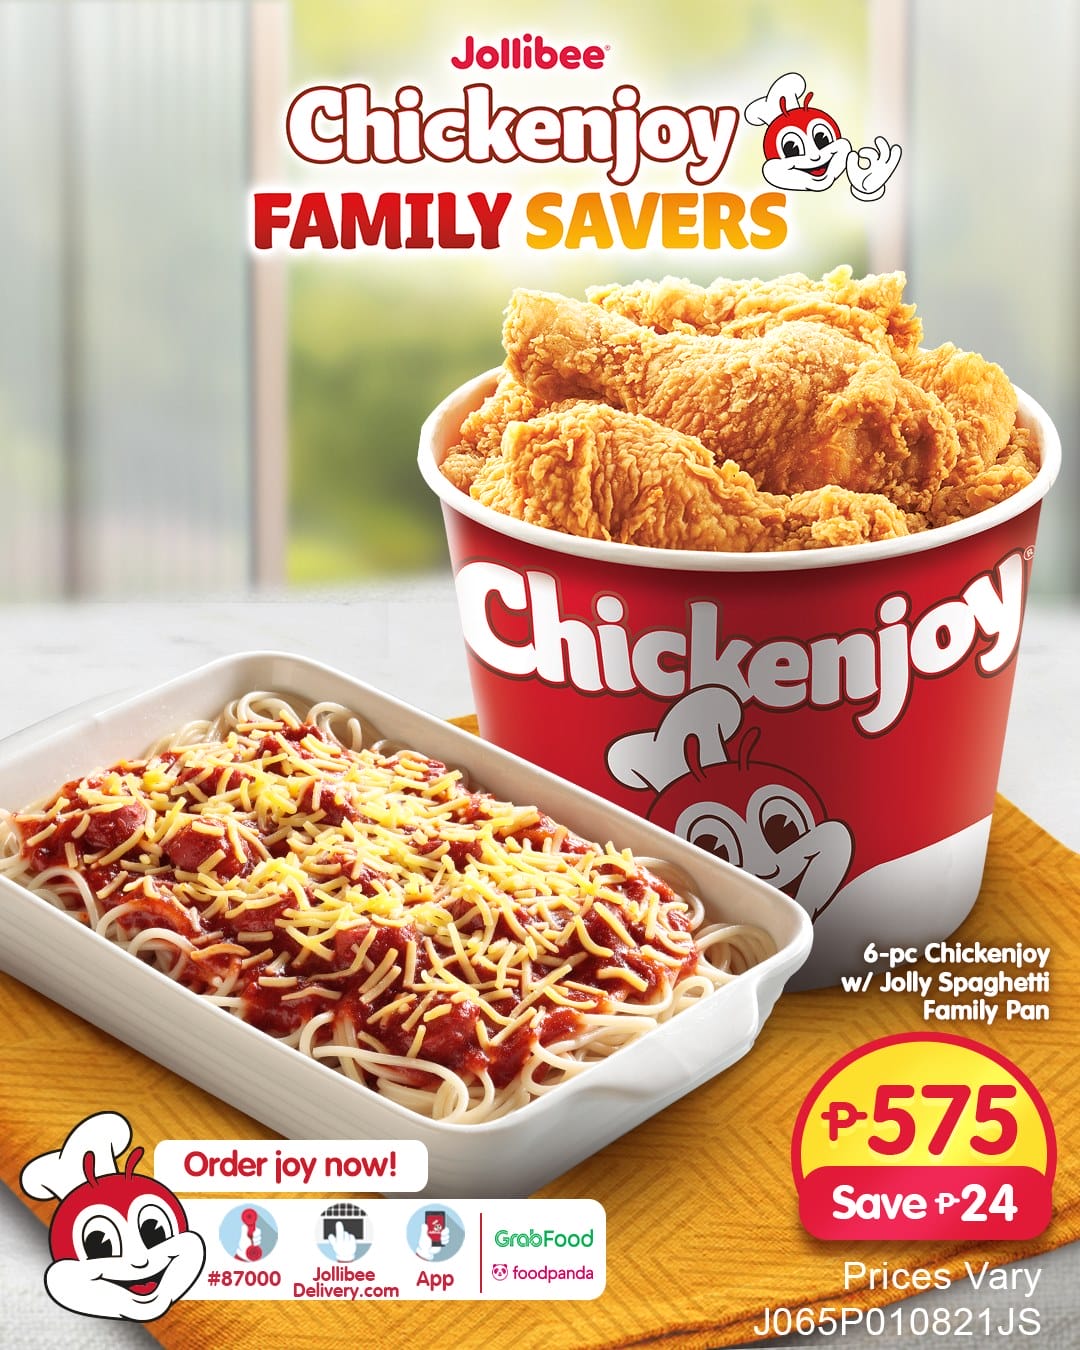 Jollibee Chickenjoy Family Savers for ₱575 (Save ₱24) Deals Pinoy